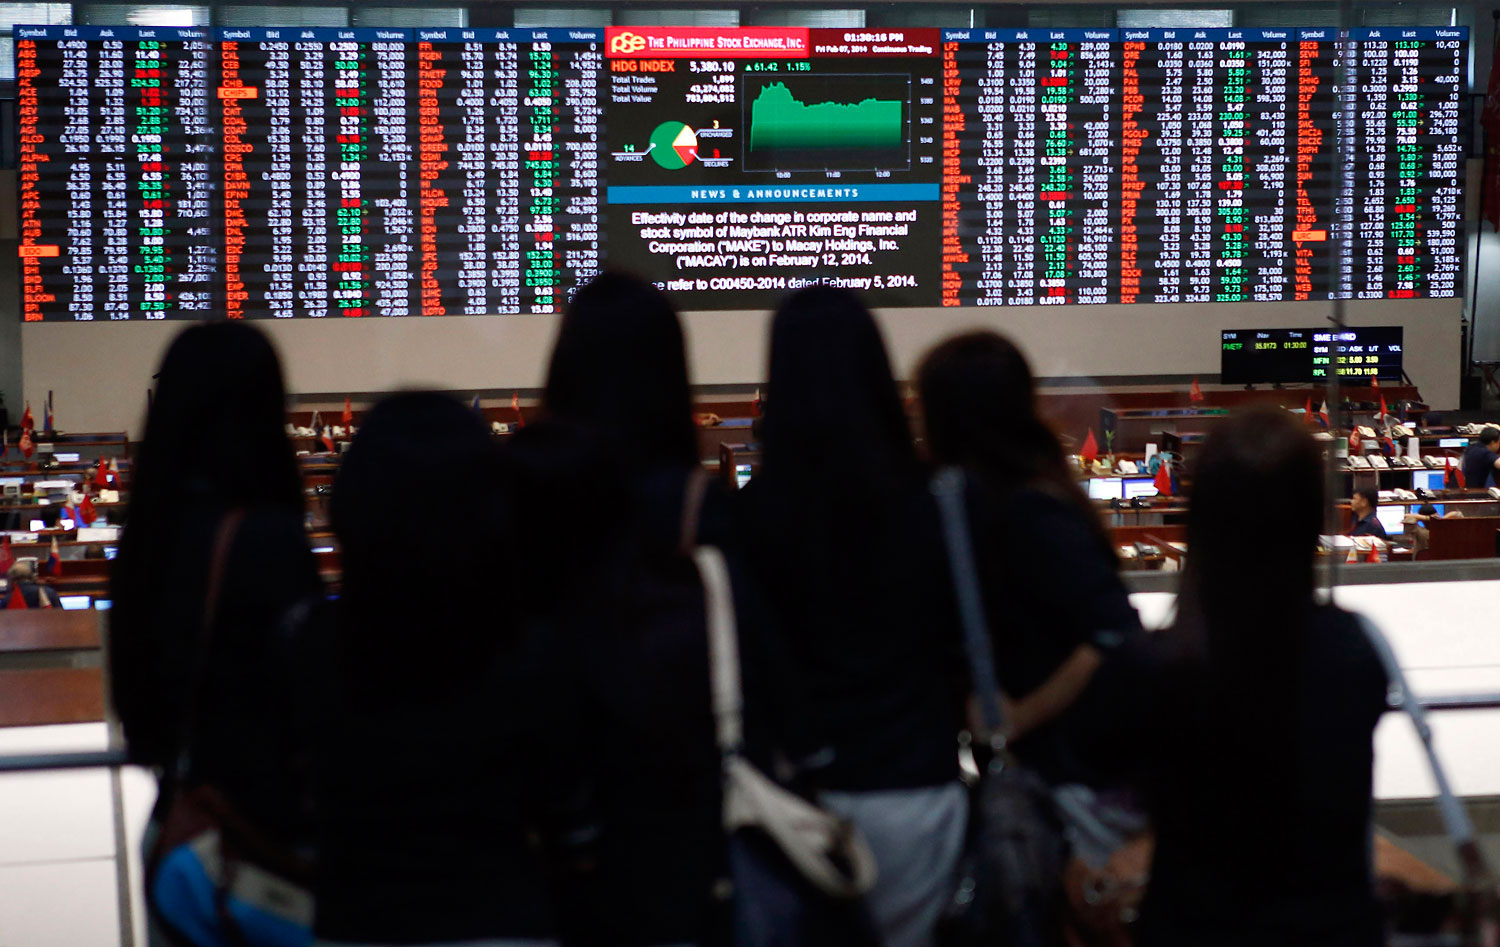 University interns monitor trading at the Philippine Stock Exchange in the financial district of Makati, Philippines, on Feb. 7, 2014 (Erik de Castro—Reuters)